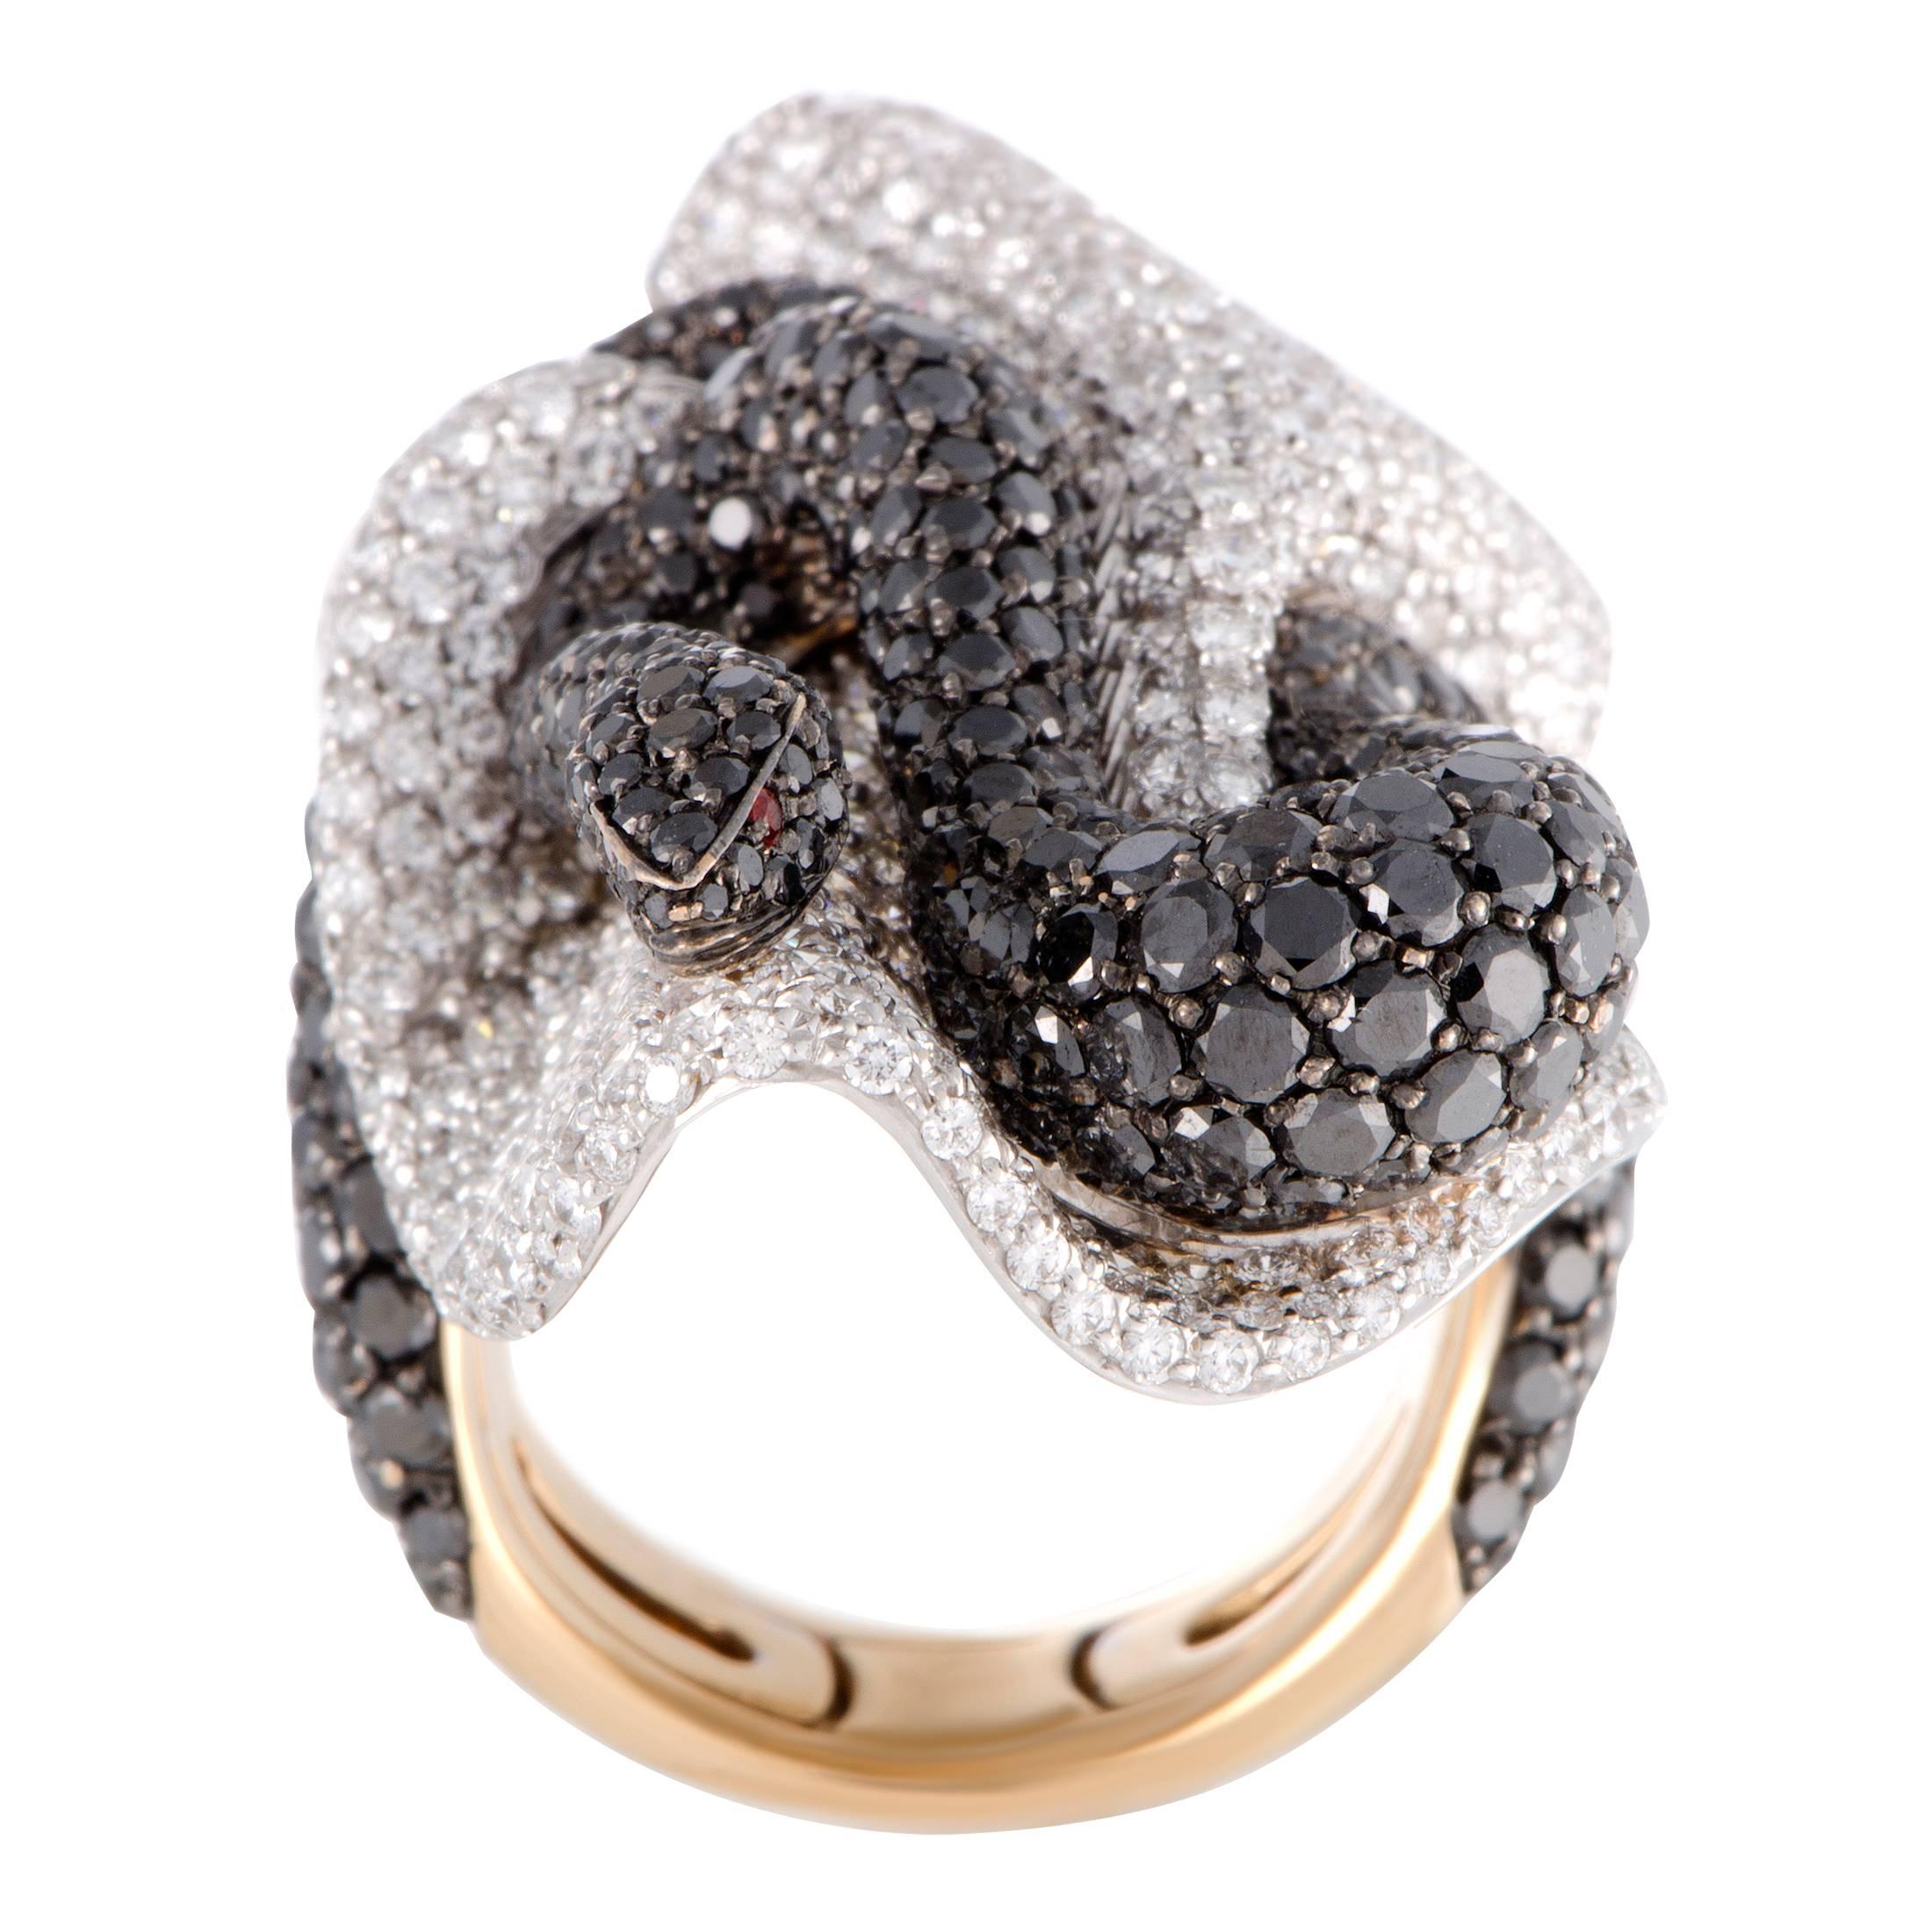 A diamond-paved snake marvelously stands out against bright backdrop in this superb ring designed by Palmiero. Made of 18K white and rose gold, the ring is paved with white diamonds, while the snake is paved with black diamonds and also features two